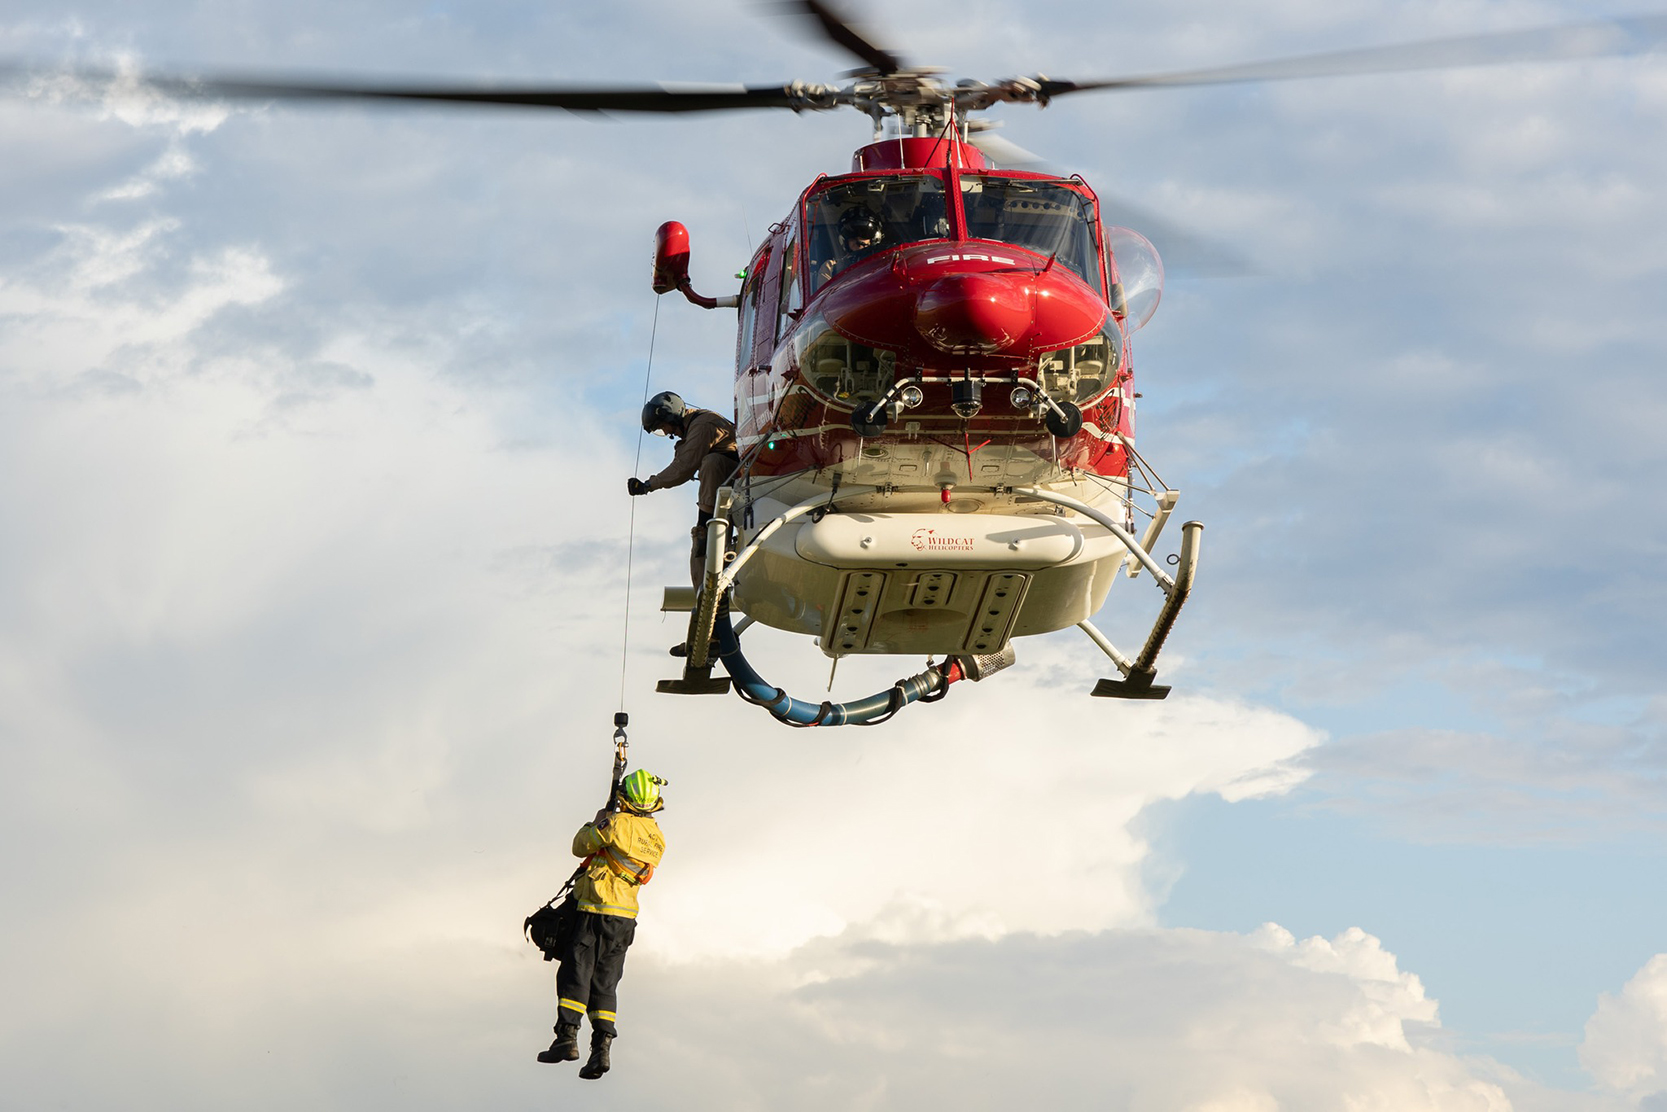 A firefighter being airlifted on to a helicopter